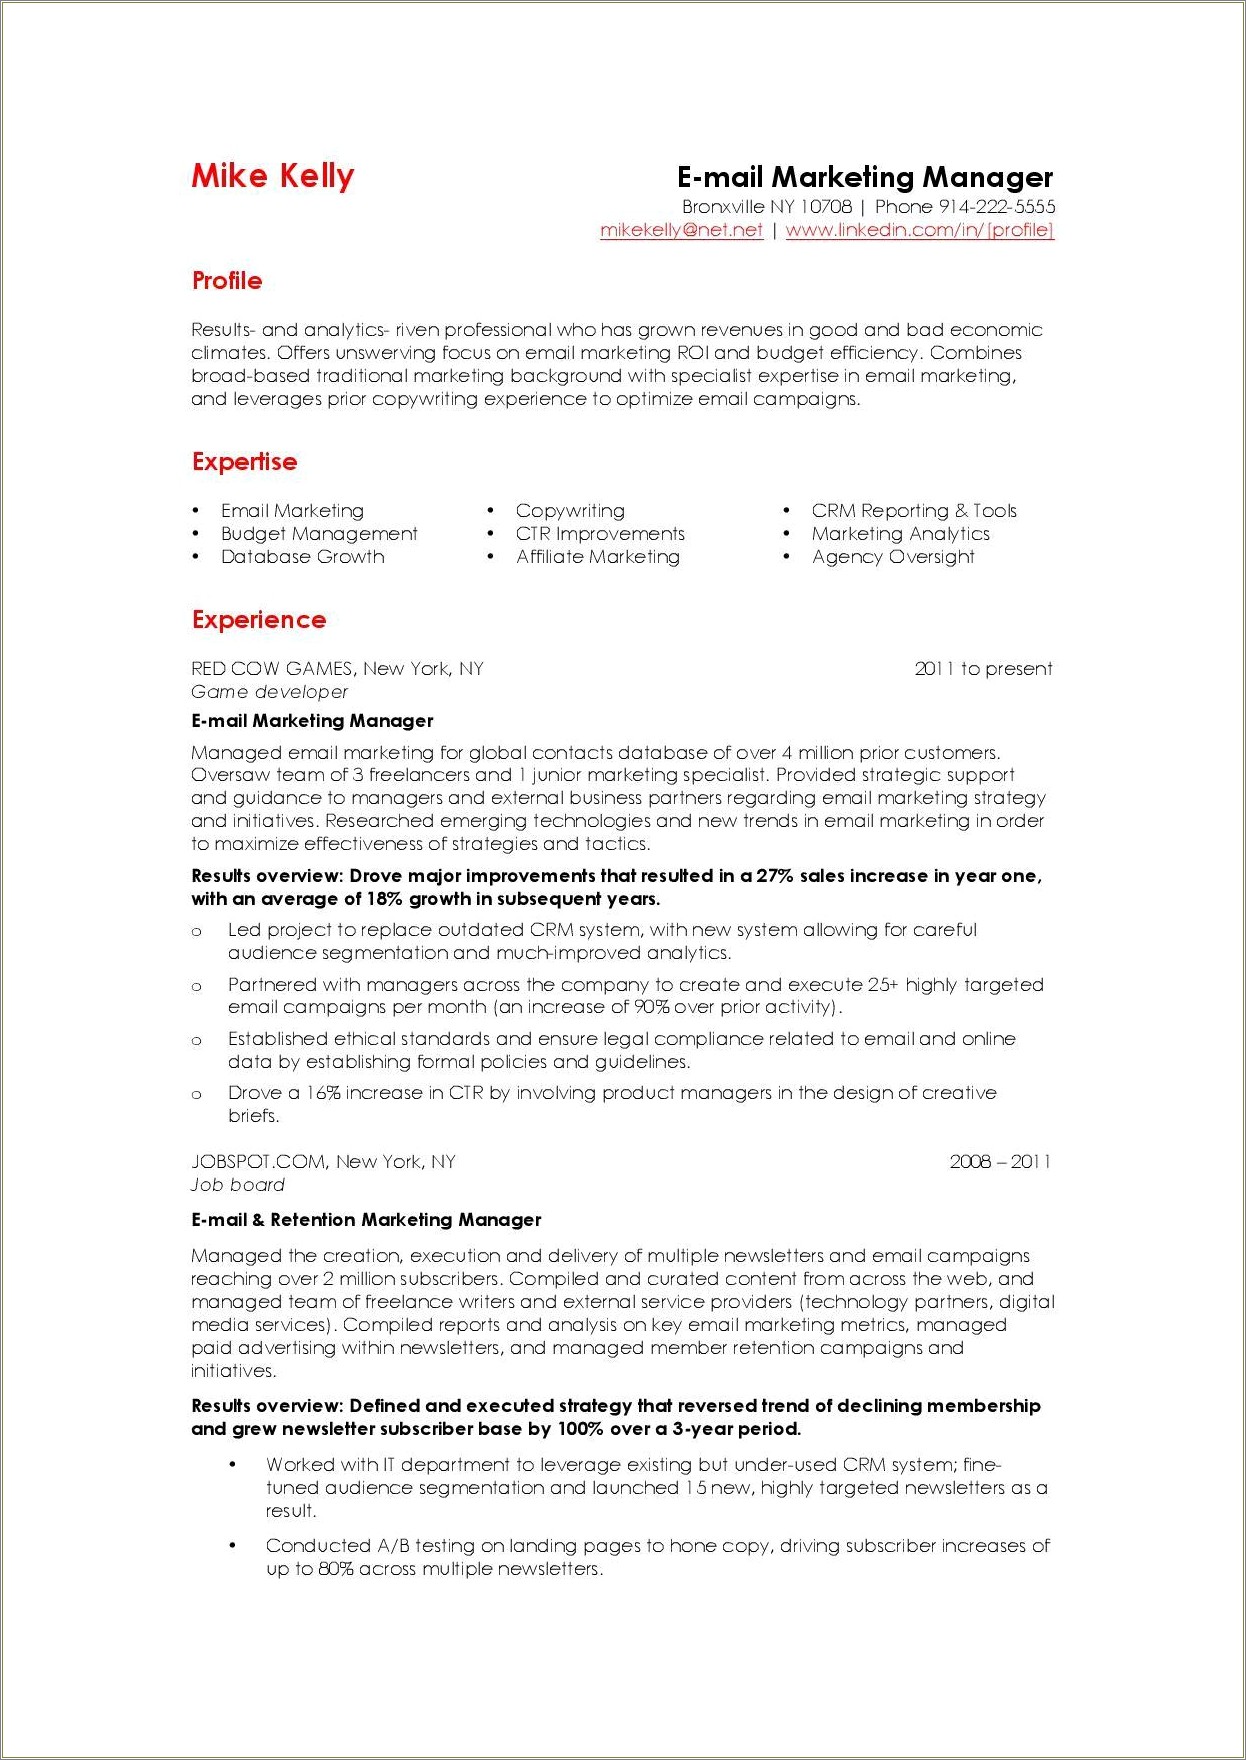 Resume Examples For An Entry Level Marketing Job